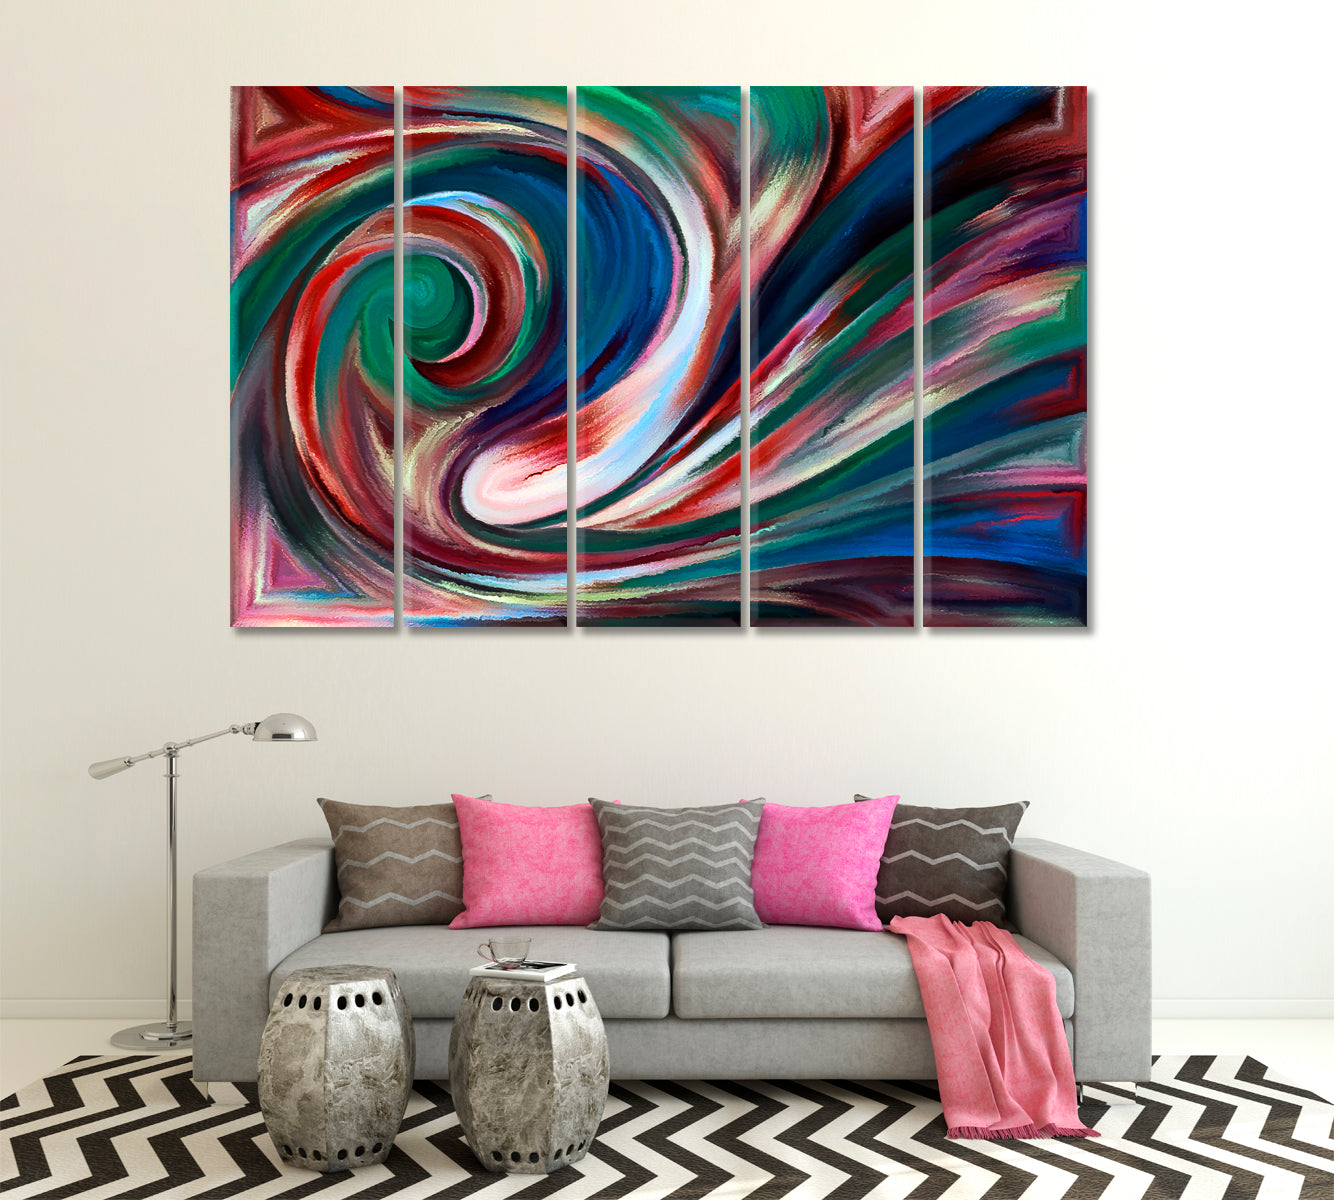 Abstract Design Colorful Curves Abstract Art Print Artesty 5 panels 36" x 24" 